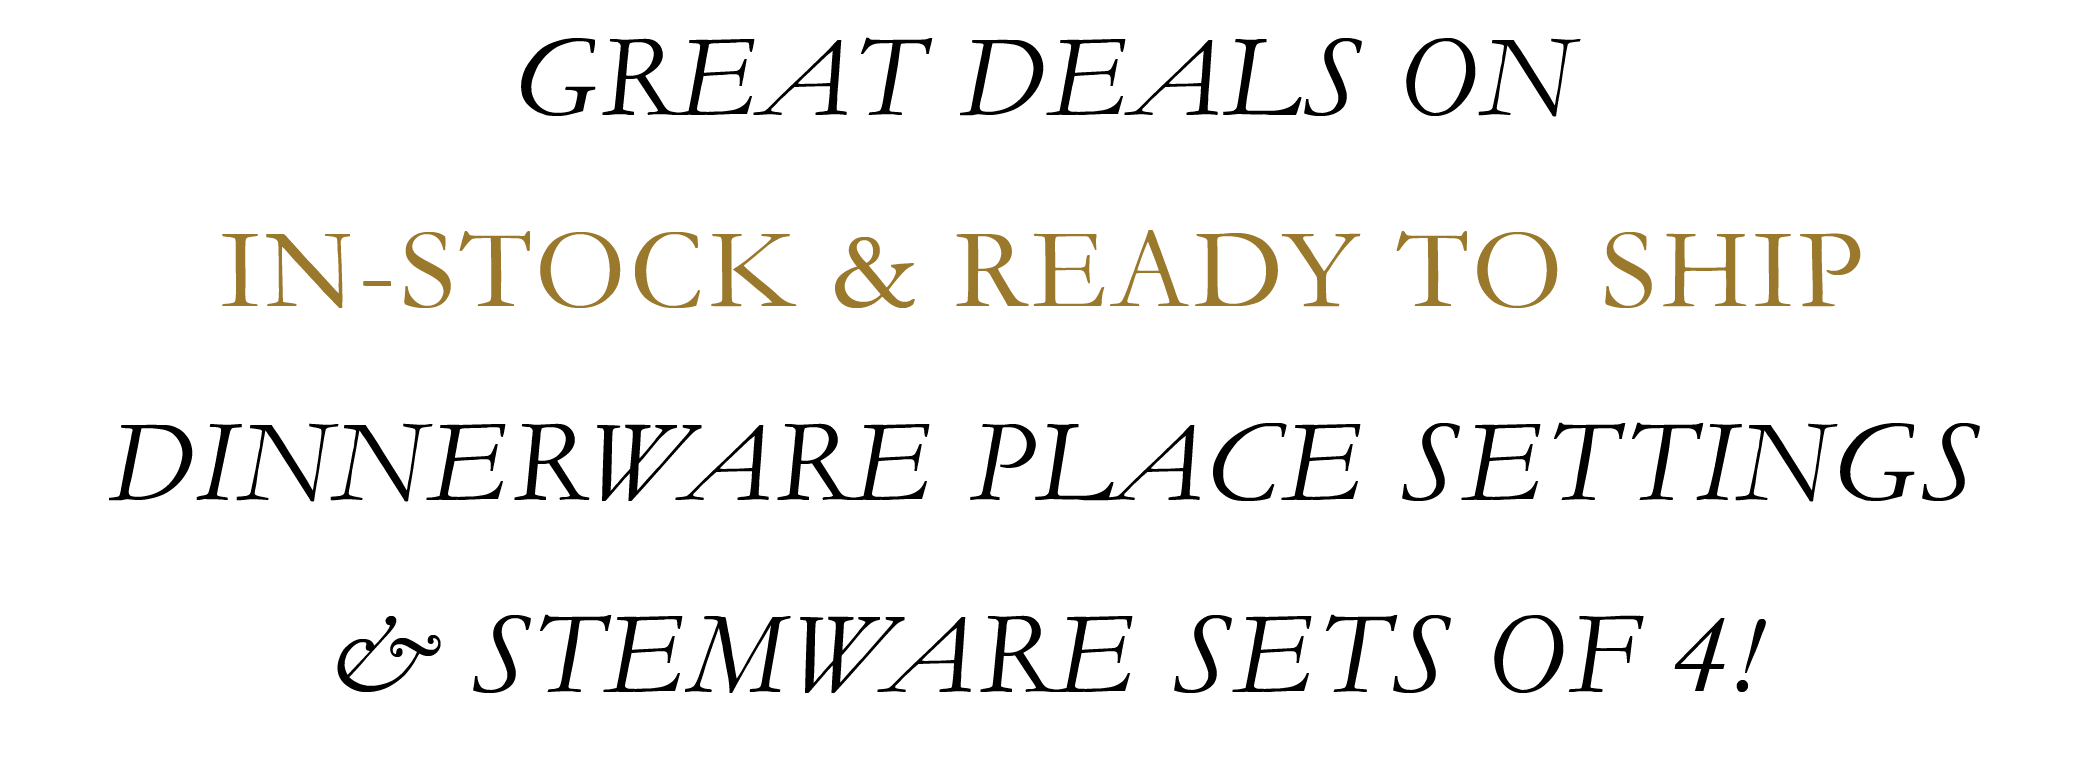 GREAT DEALS ON IN-STOCK READY TO SHIP DINNERWARE PILLACE SETTINGS STEMWARE SETS OF 4 